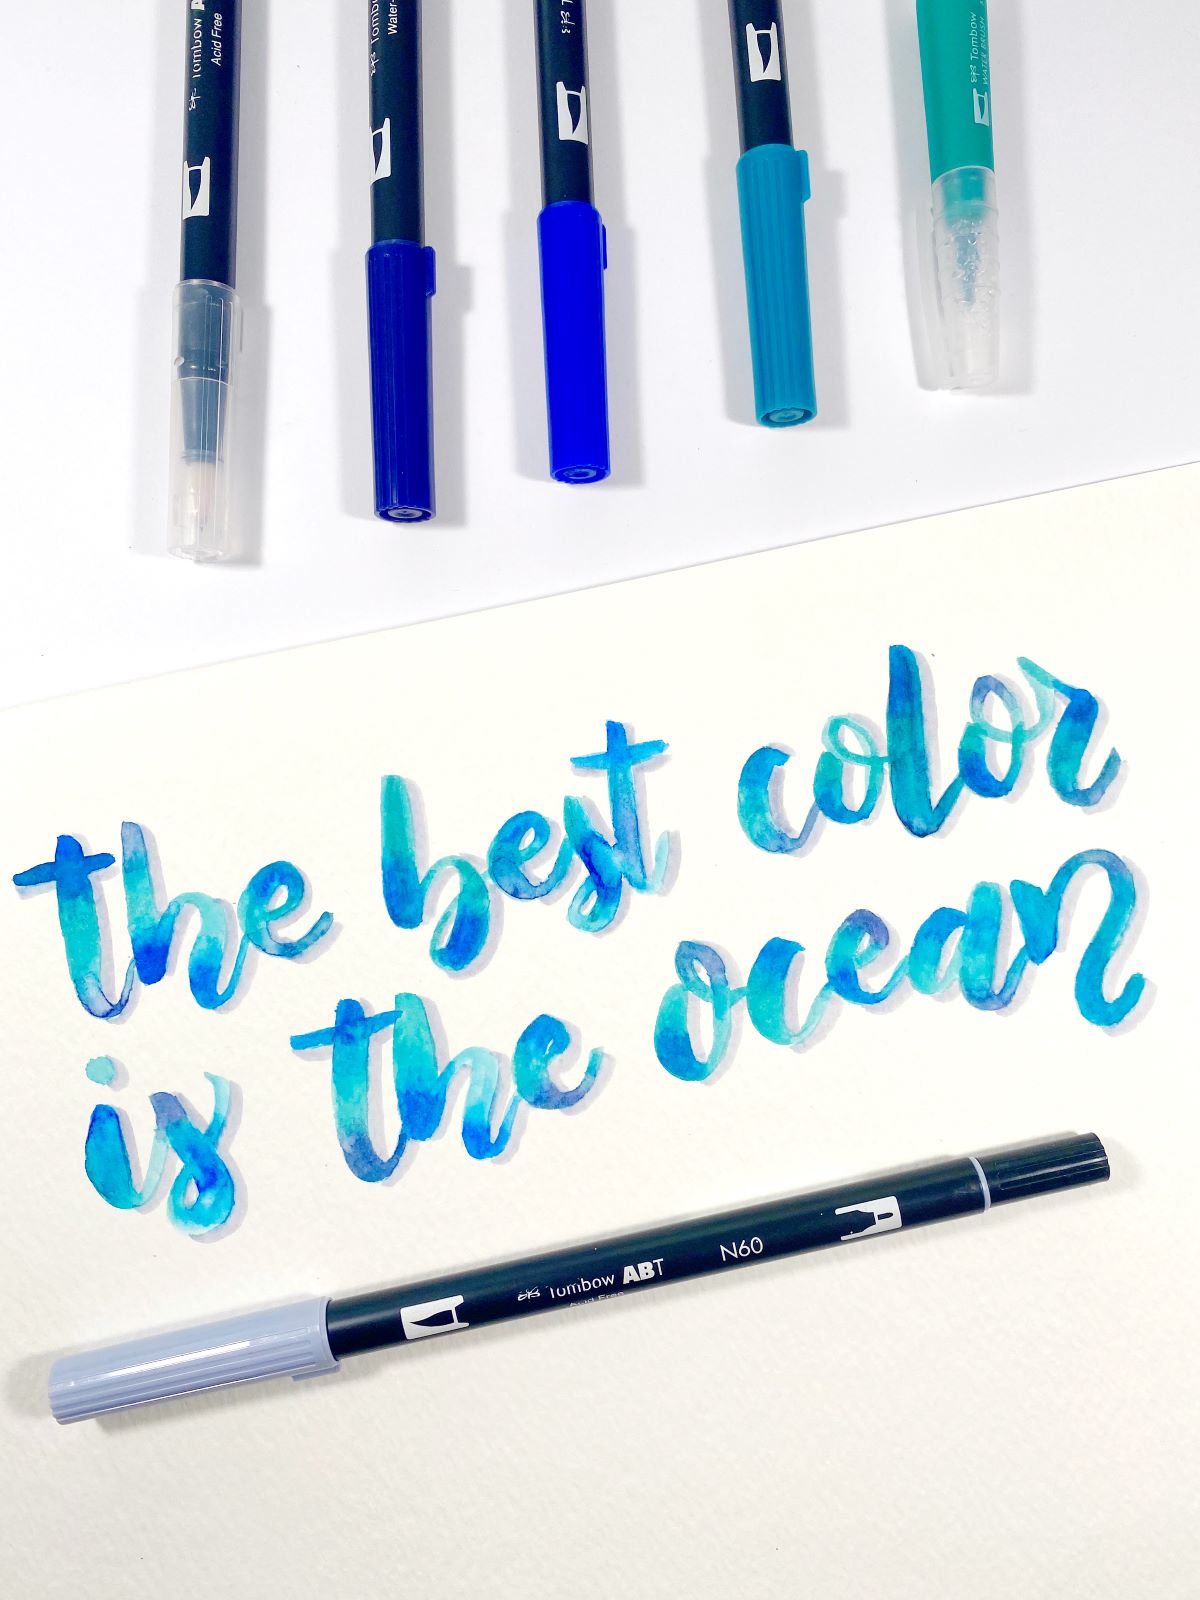 Create Blended Watercolor Lettering  - Mandy Faucher